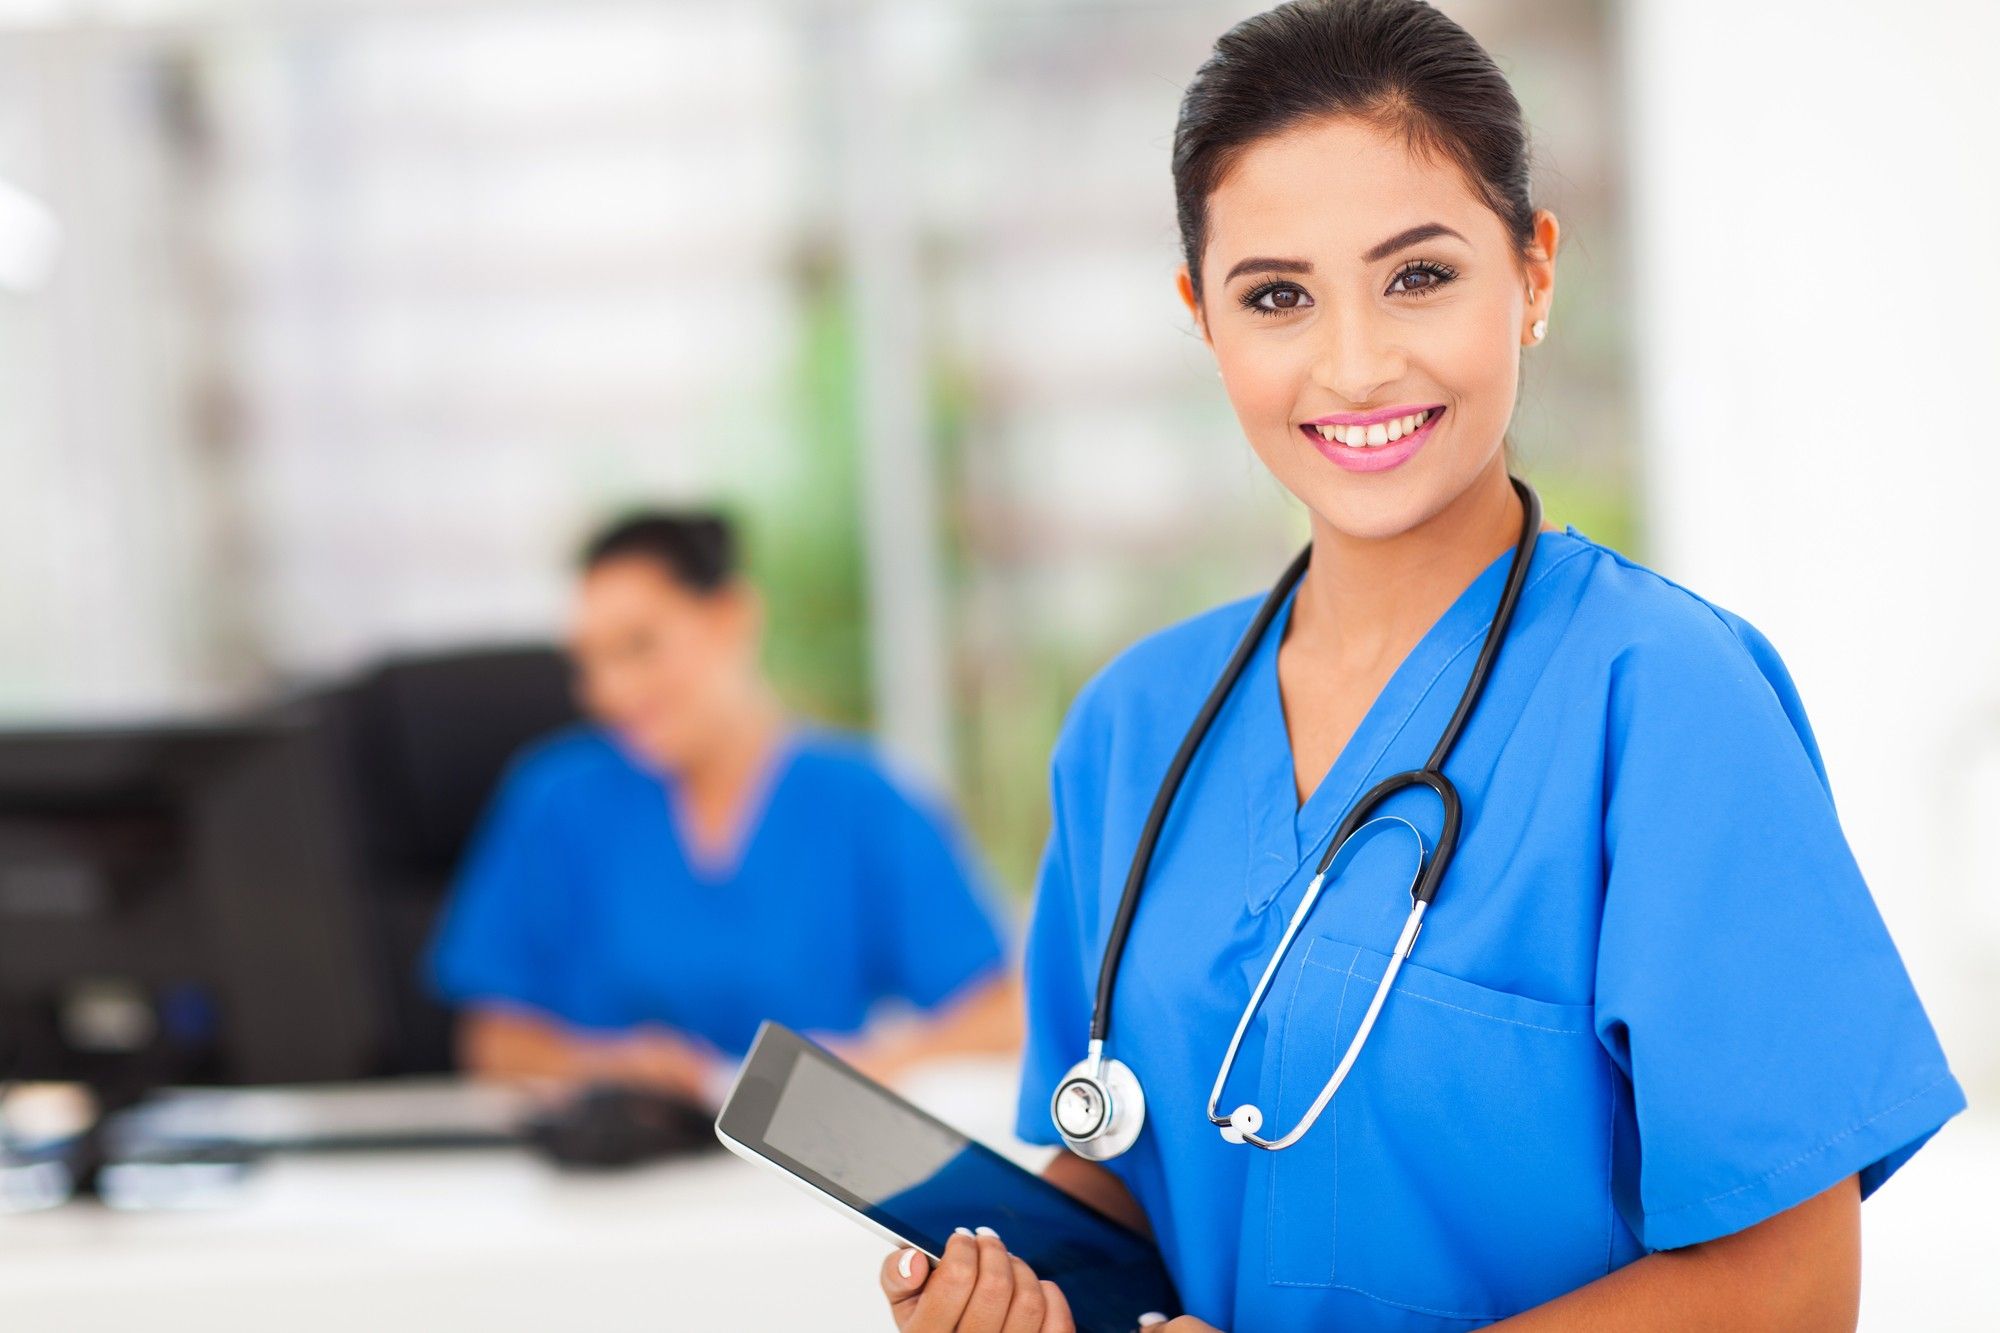 A Primary Provided Management wage & hour settlement has been reached to resolve claims from underpaid nurses.